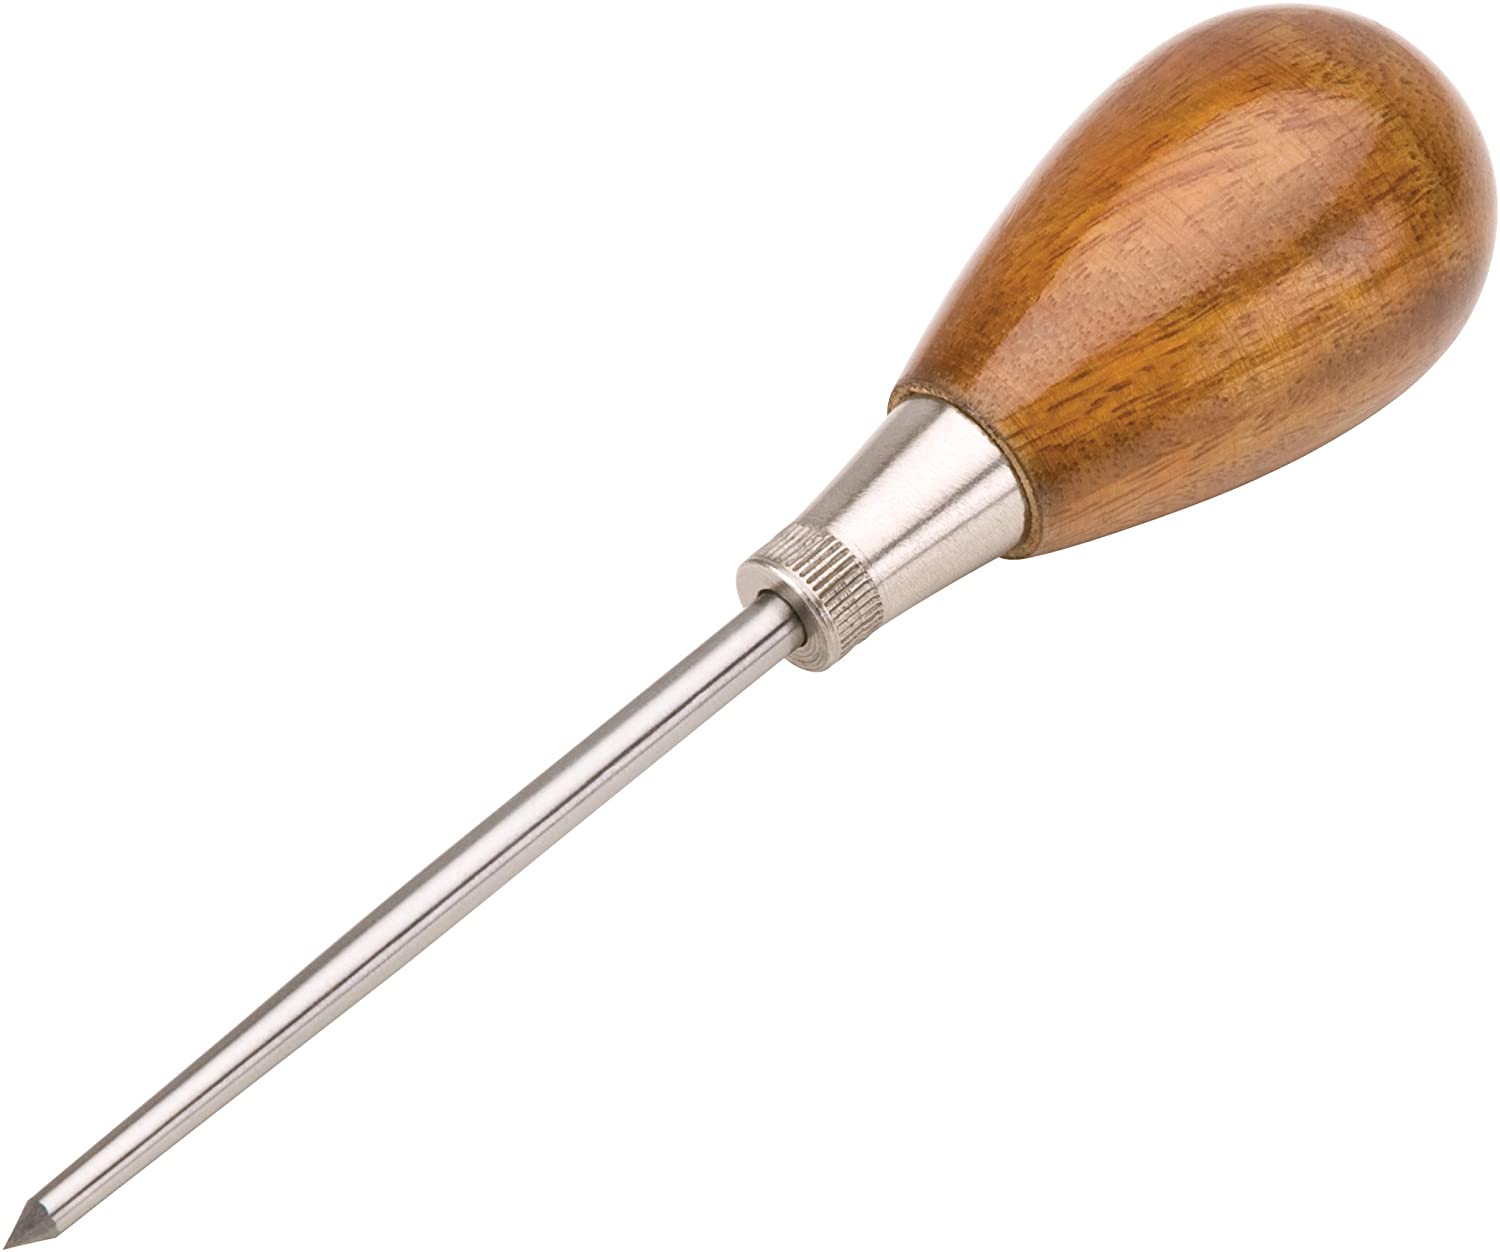 Ramelson 6 Scratch Awl for Marking Lines, Centering Holes and